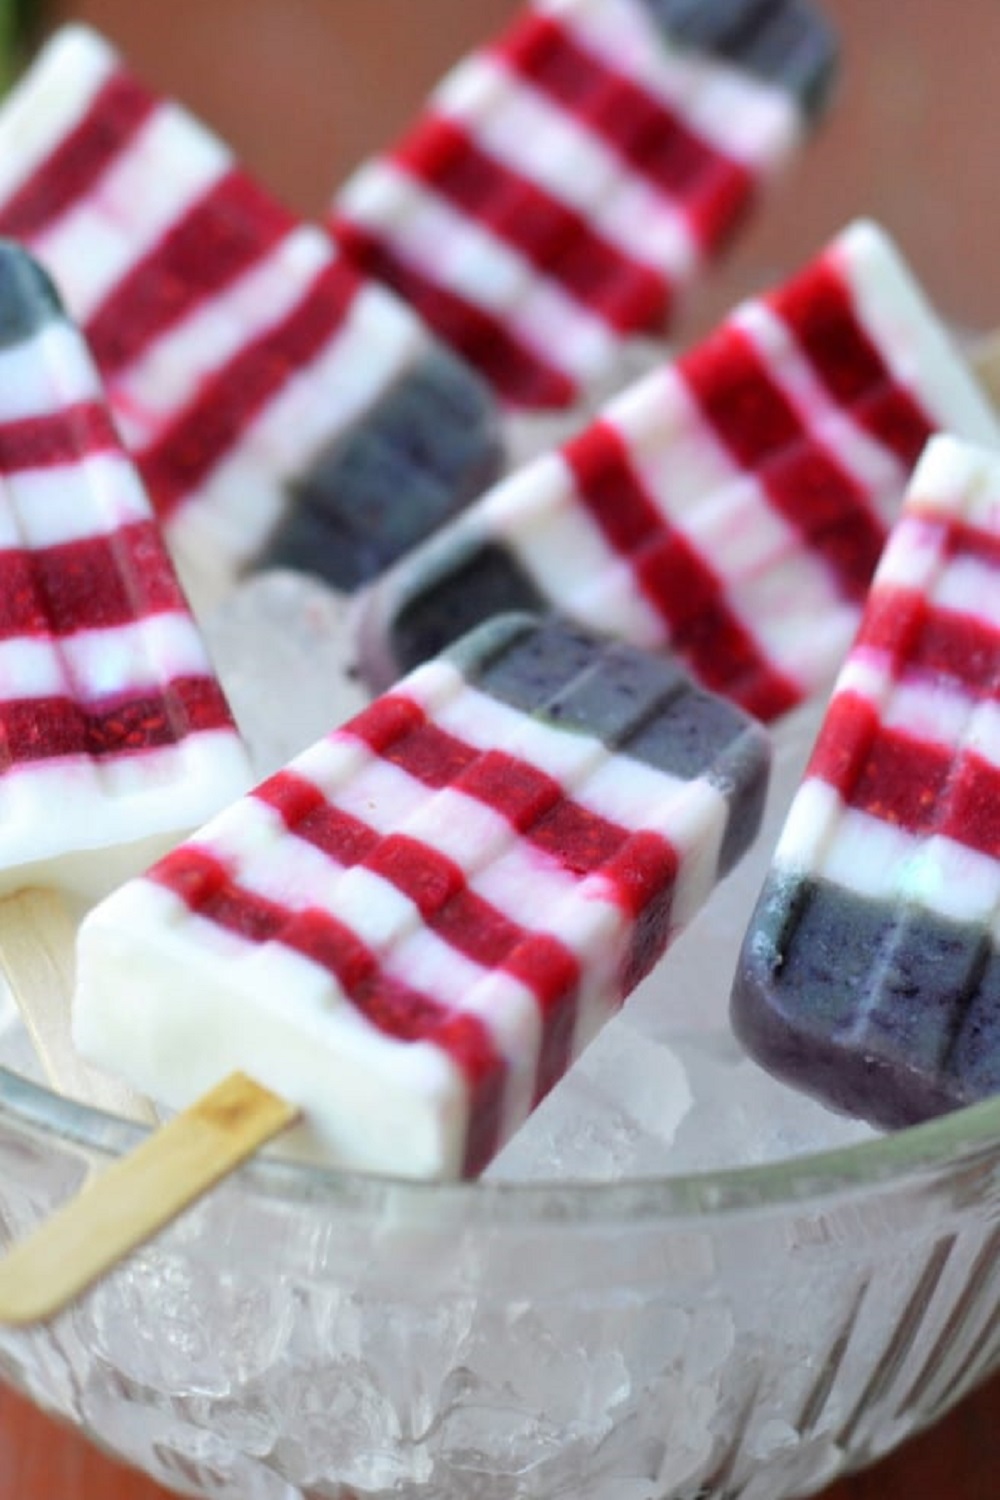 10 Best Healthy 4th of July Desserts